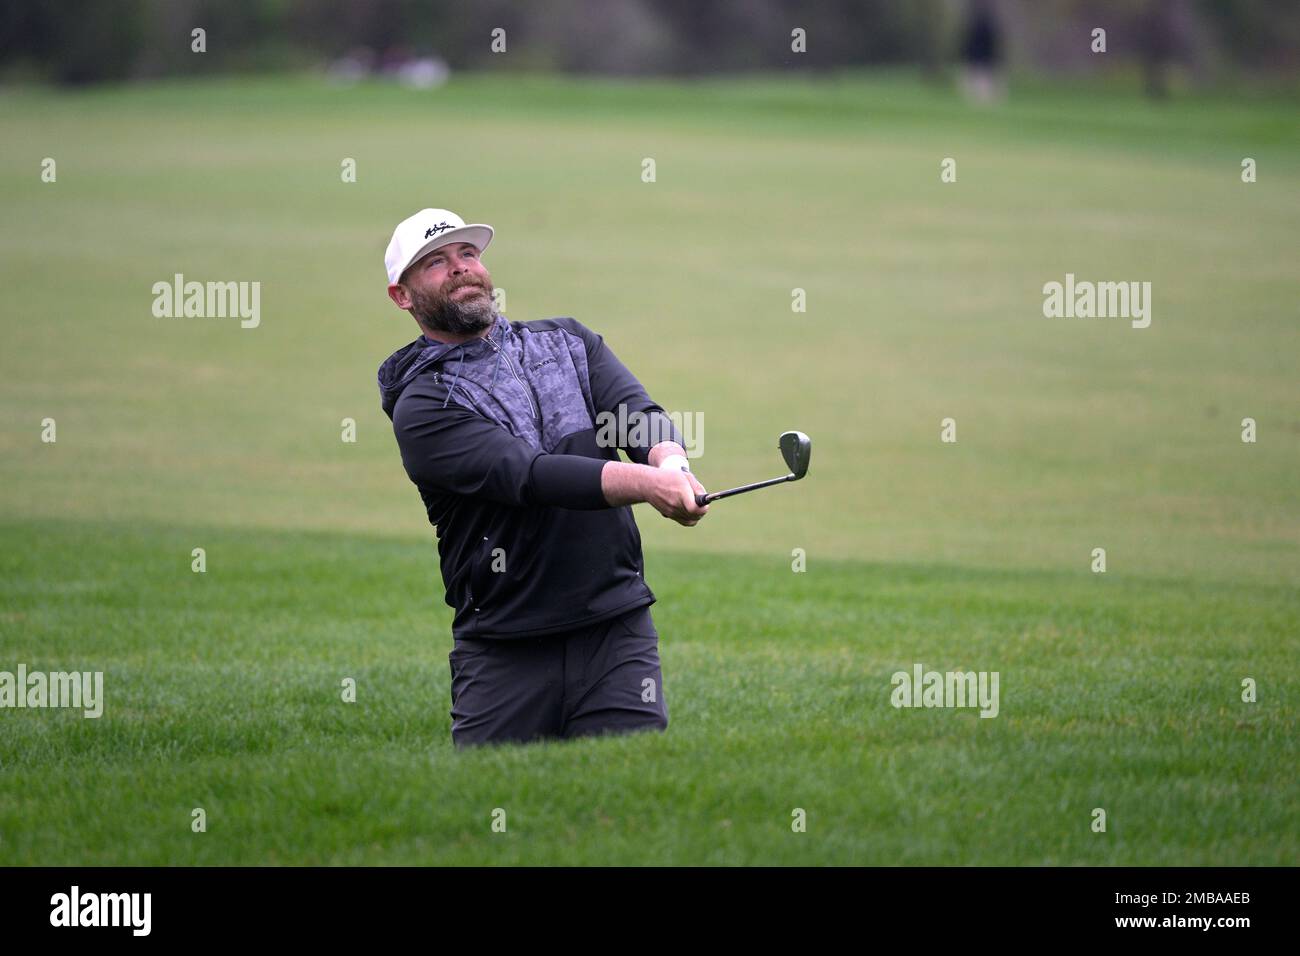 Former professional baseball player Brian McCann hits from a bunker along  the ninth fairway during the third round of the Tournament of Champions  LPGA golf tournament, Saturday, Jan. 22, 2022, in Orlando